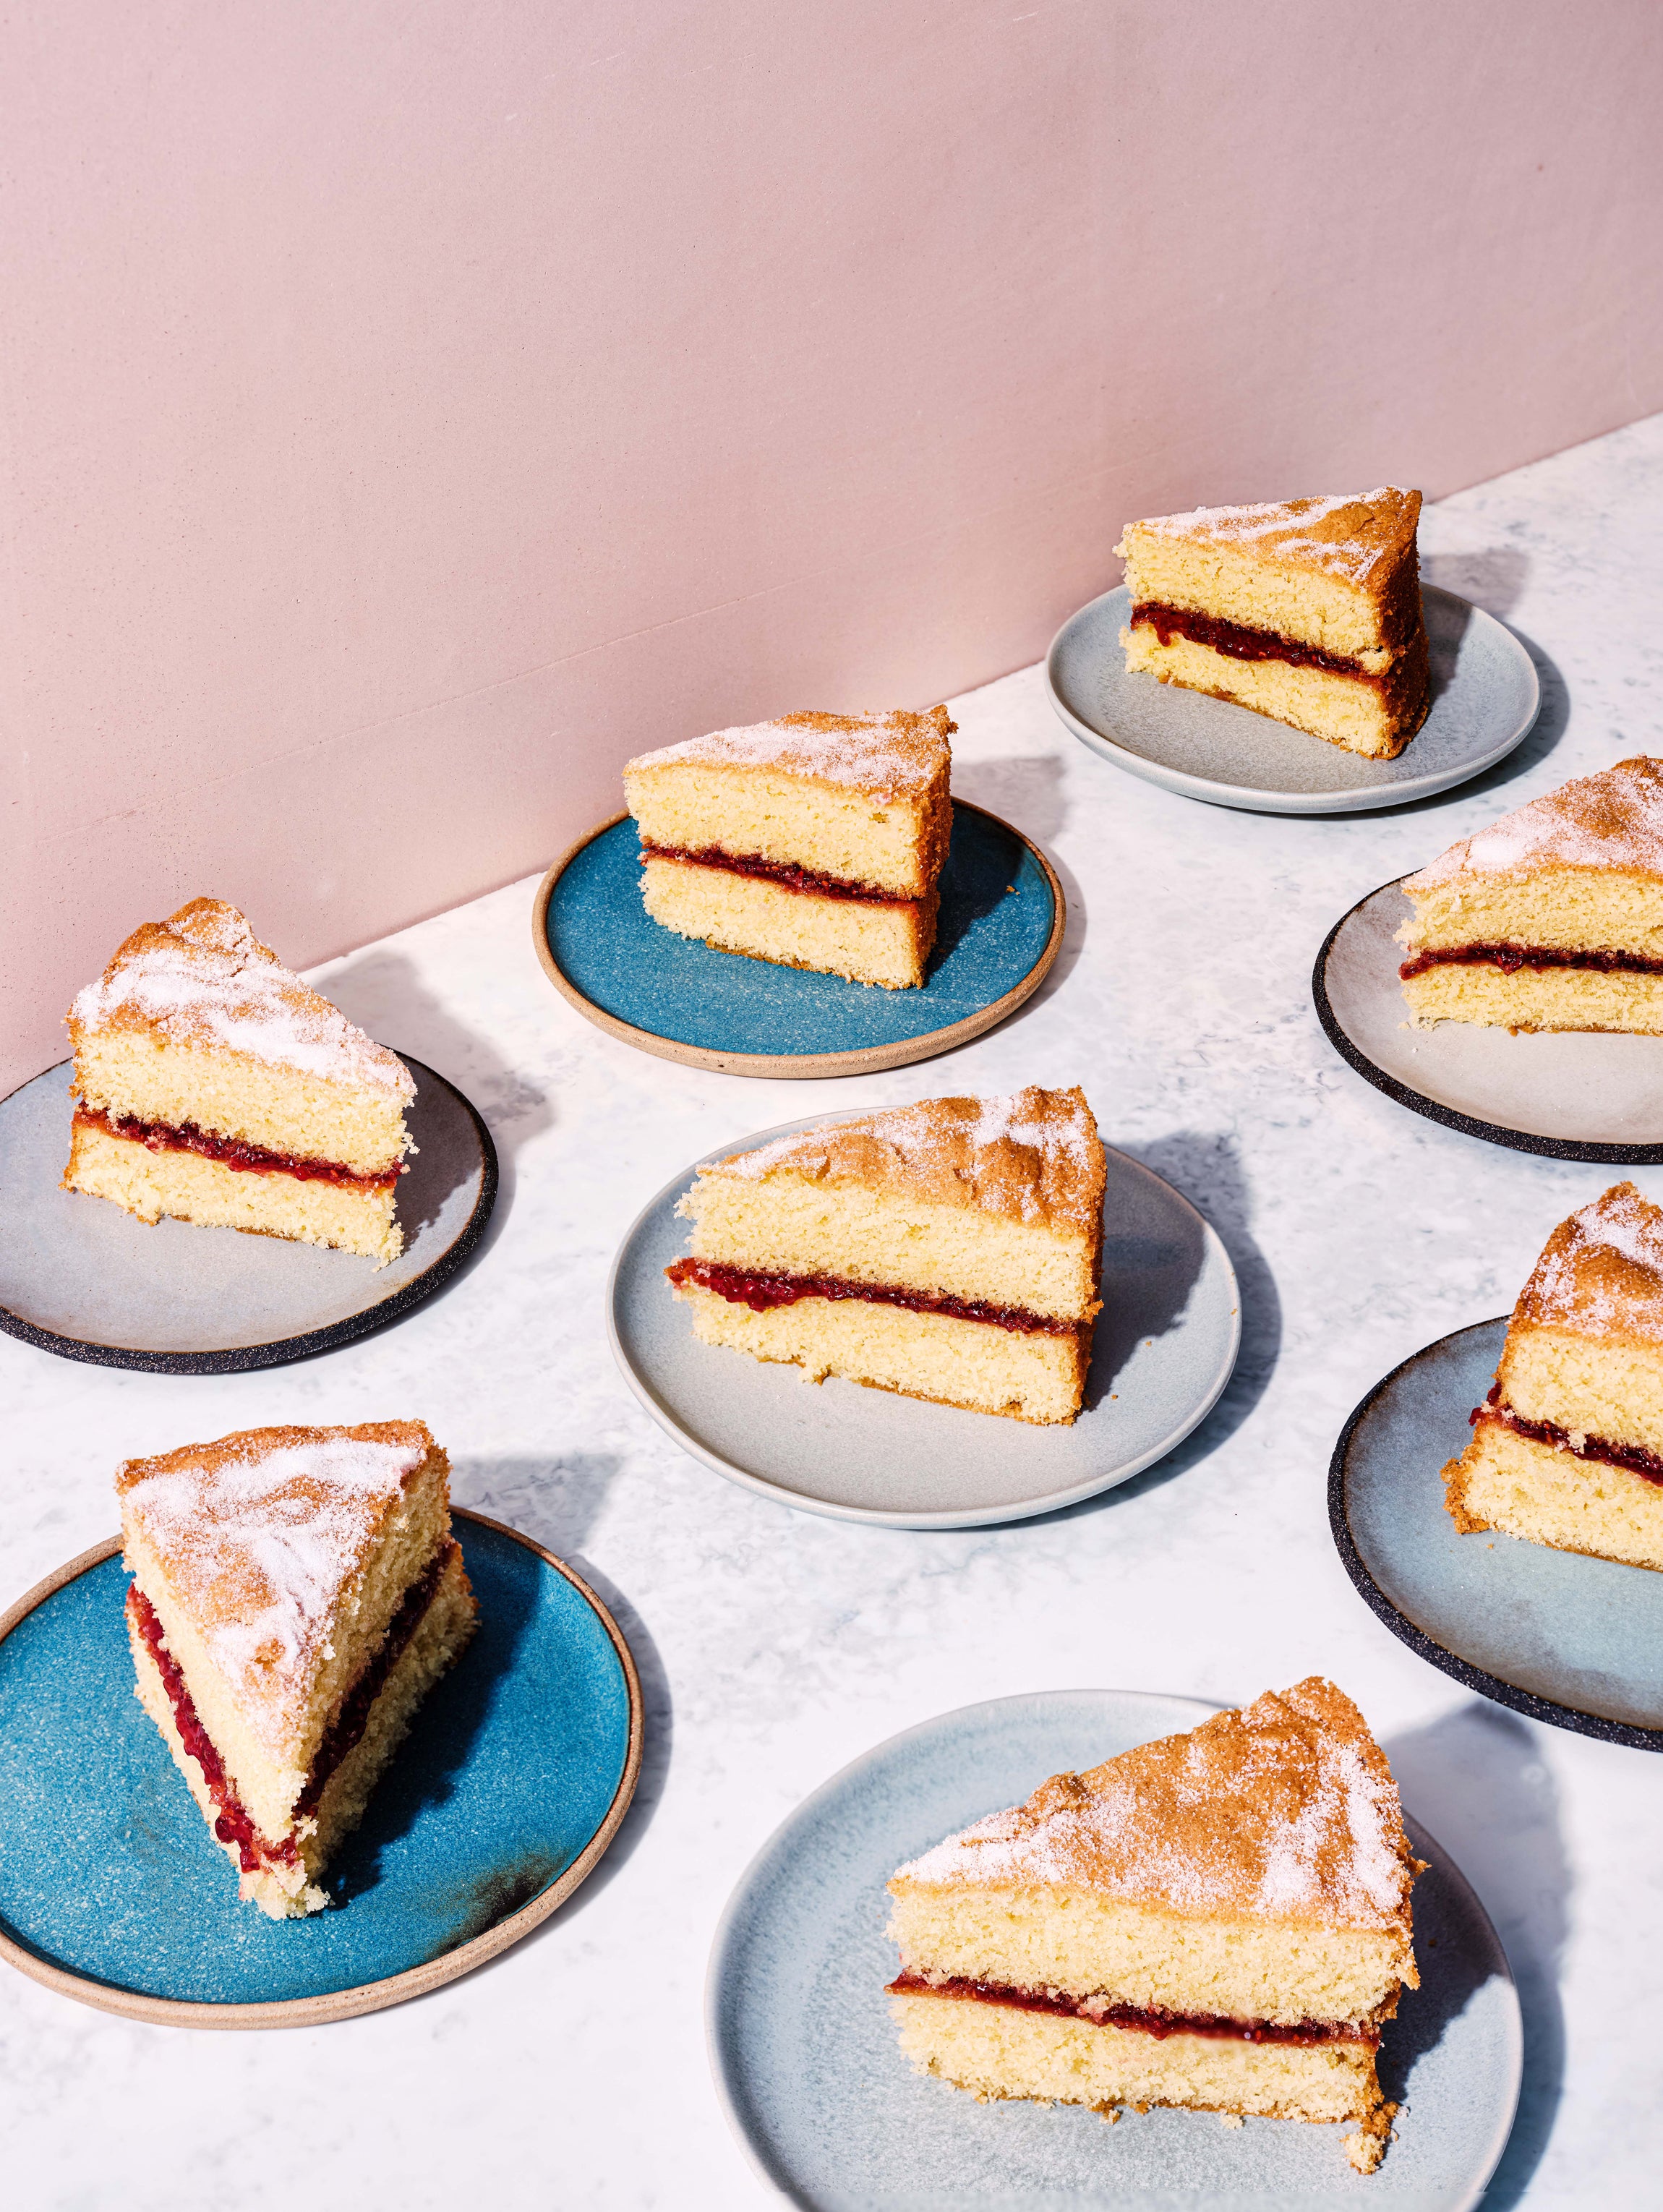 If you’re new to baking, a Victoria sponge should be your very first cake